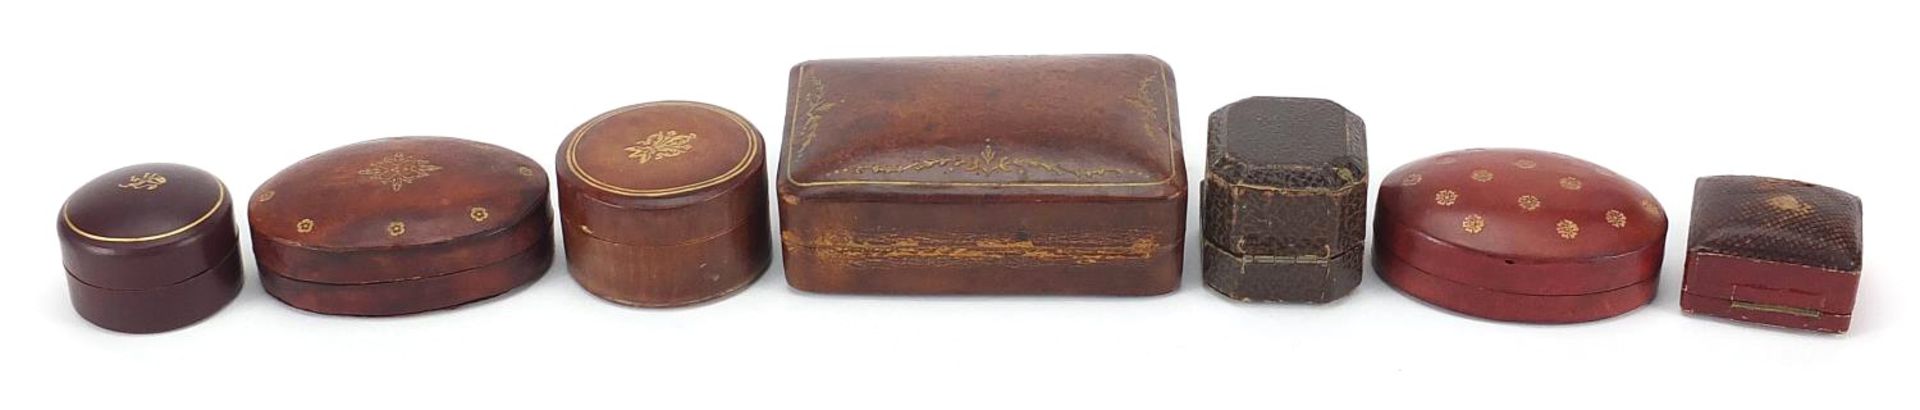 Jewellery boxes including ring boxes and Italian tooled leather, the largest 10cm wide - Image 4 of 5